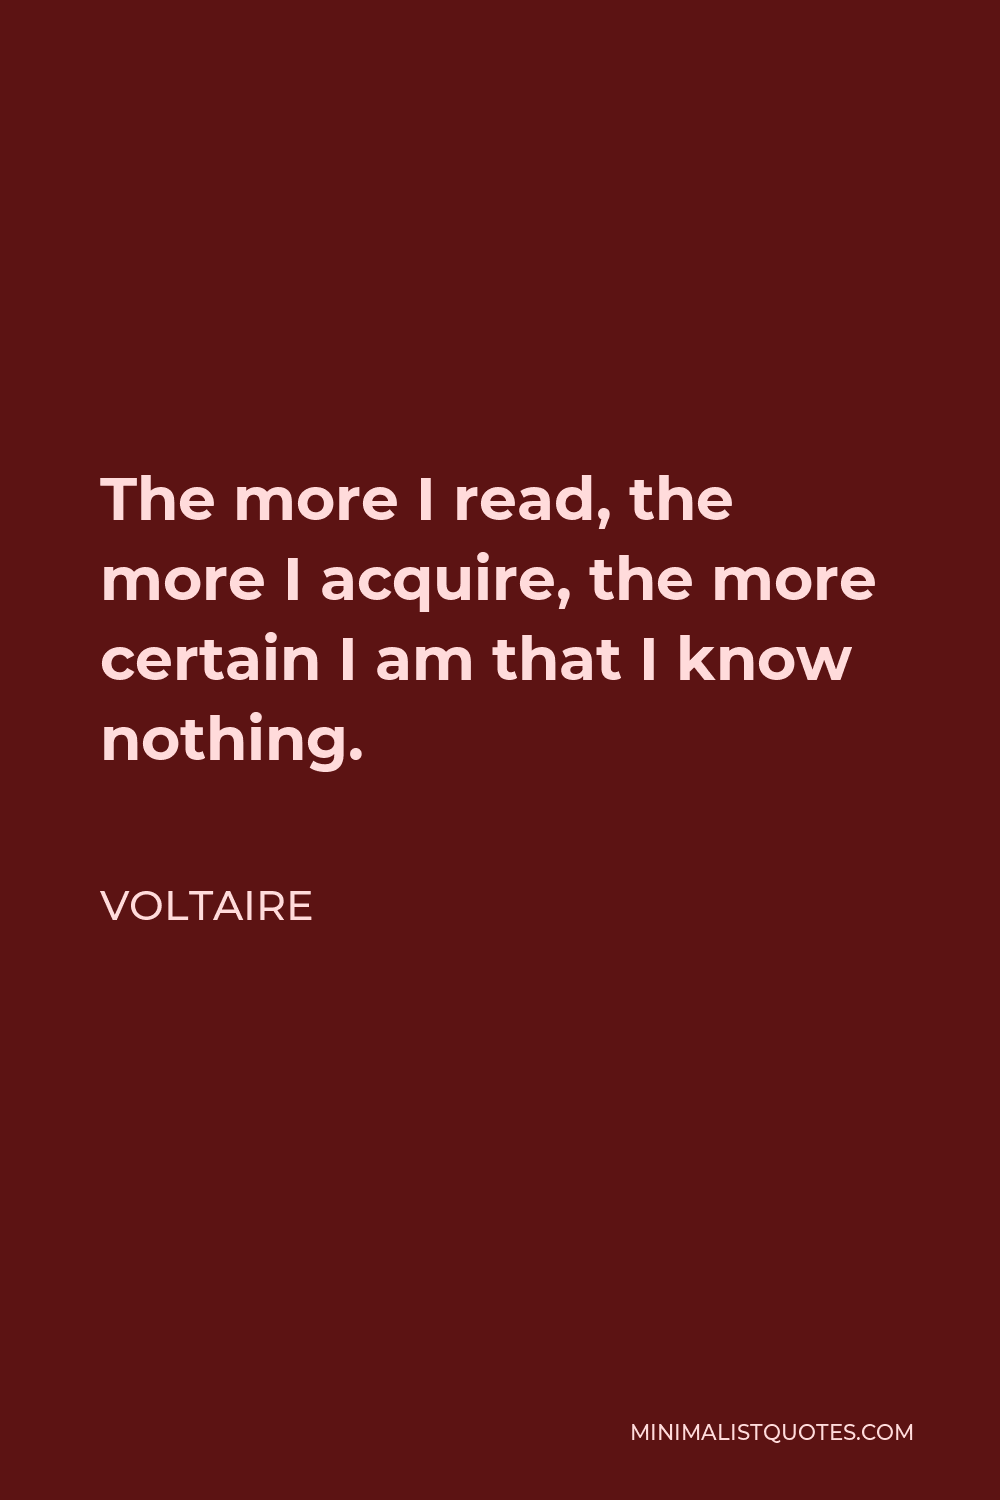 Voltaire Quote - The more I read, the more I acquire, the more certain I am that I know nothing.